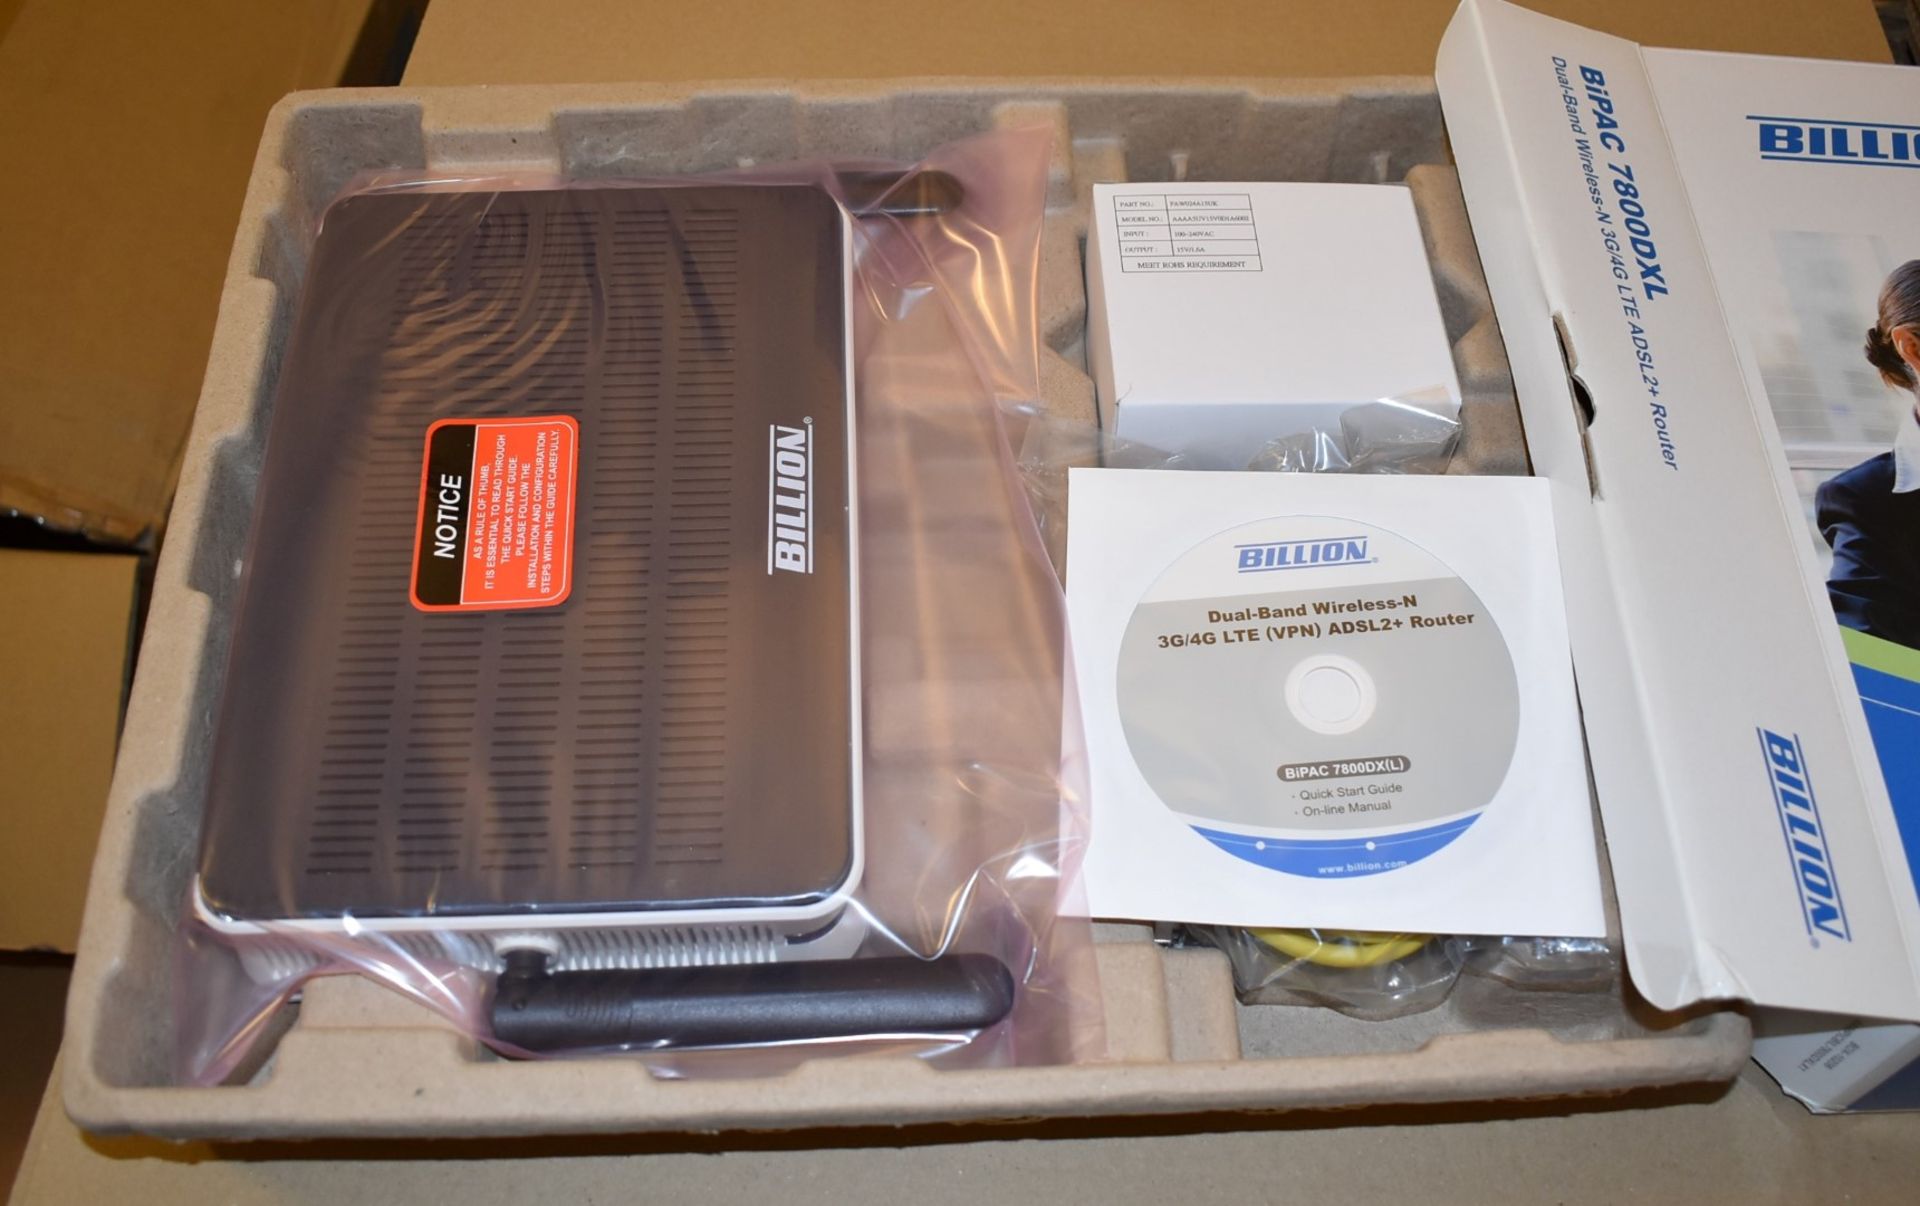 1 x Billion BiPAC 7800DXL Dual Band Wireless-N 3G/4G LTE ADSL2+ Router - New Boxed Stock - Image 3 of 4